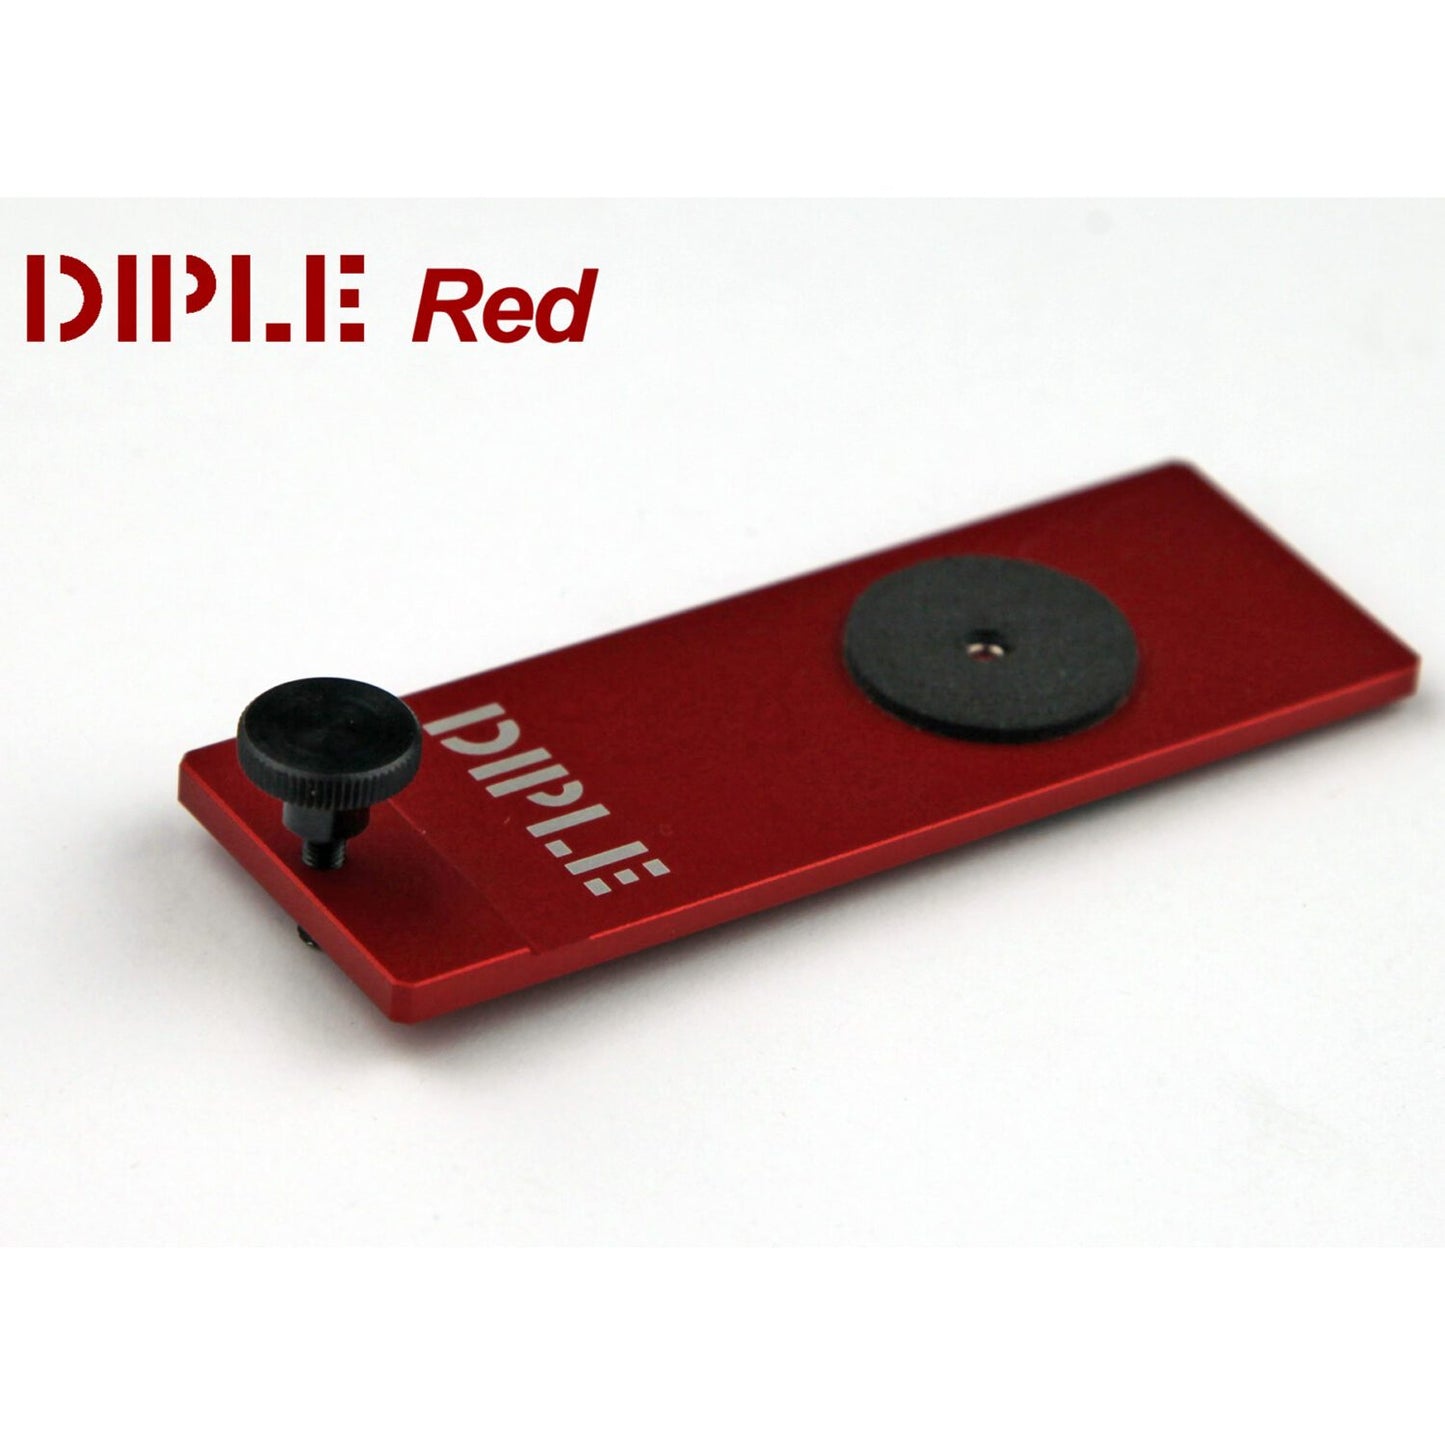 DIPLE Revolutionary microscope for your smartphone (Fine stage)